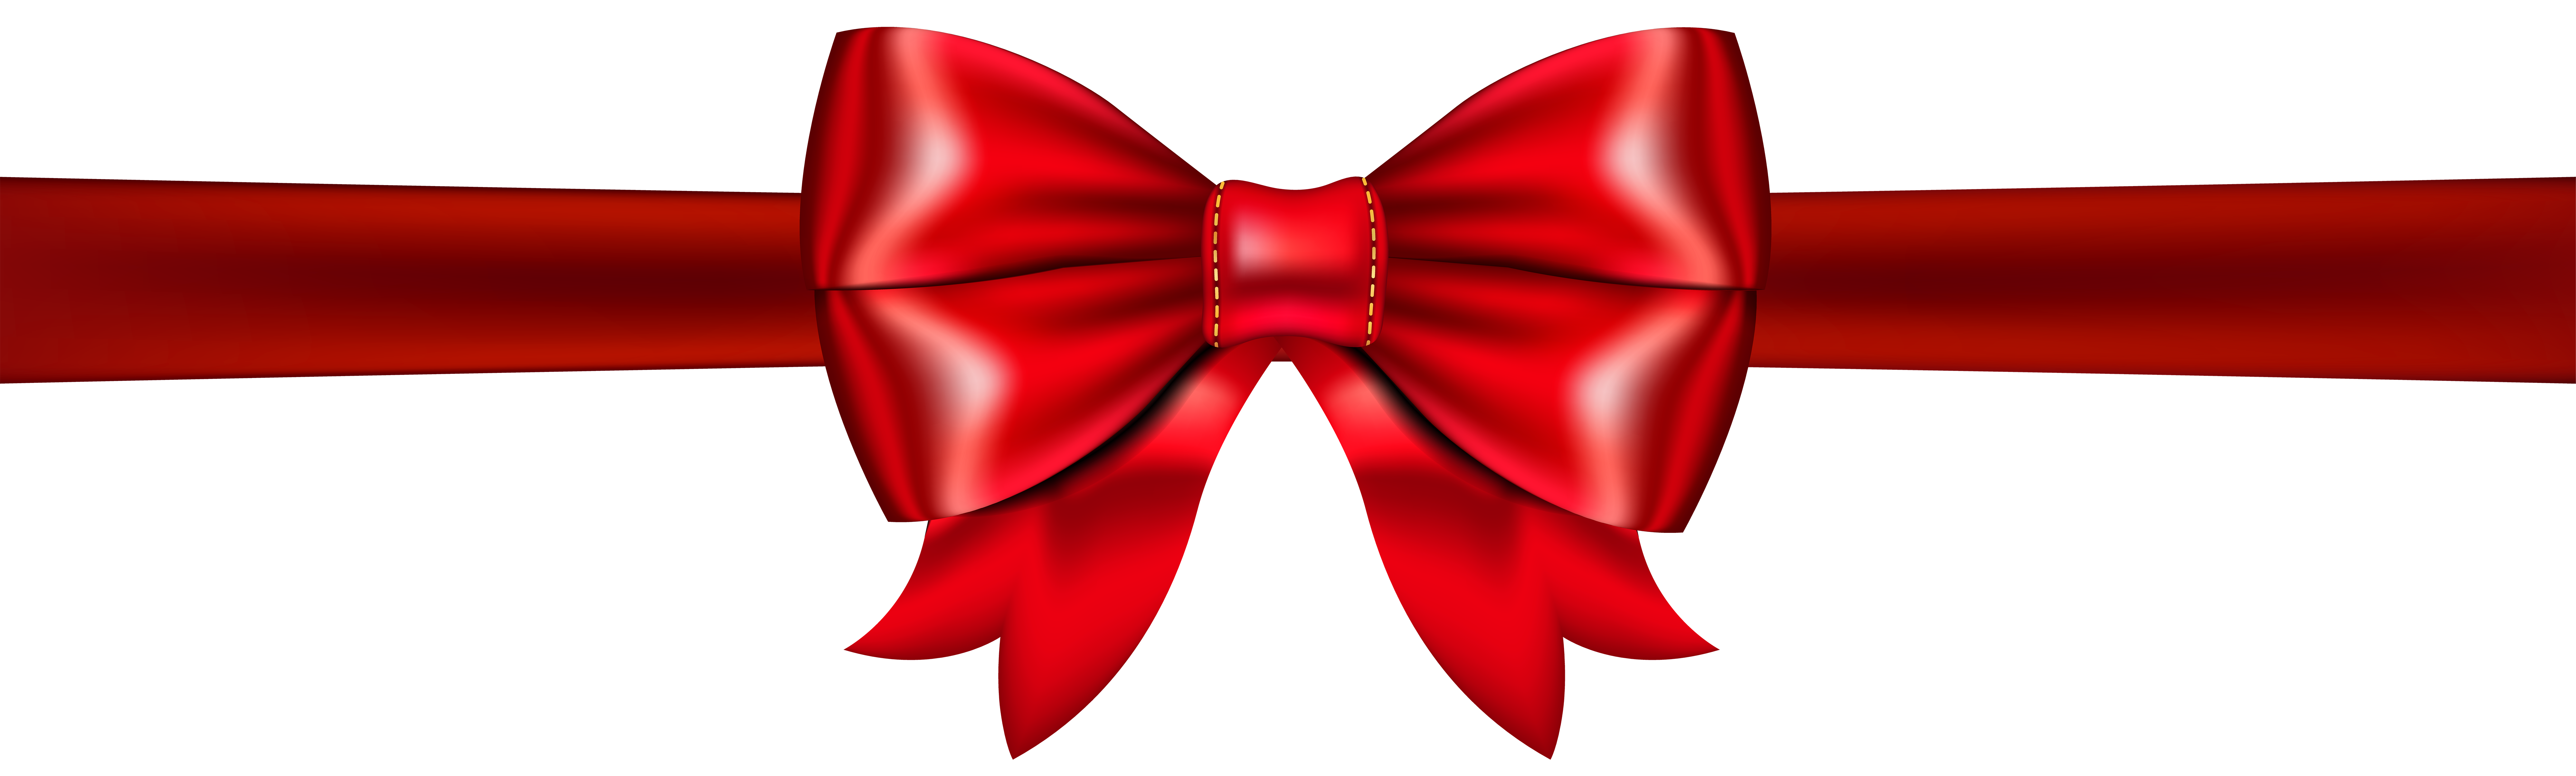 red deco bow ribbon png transparent image gallery #28524